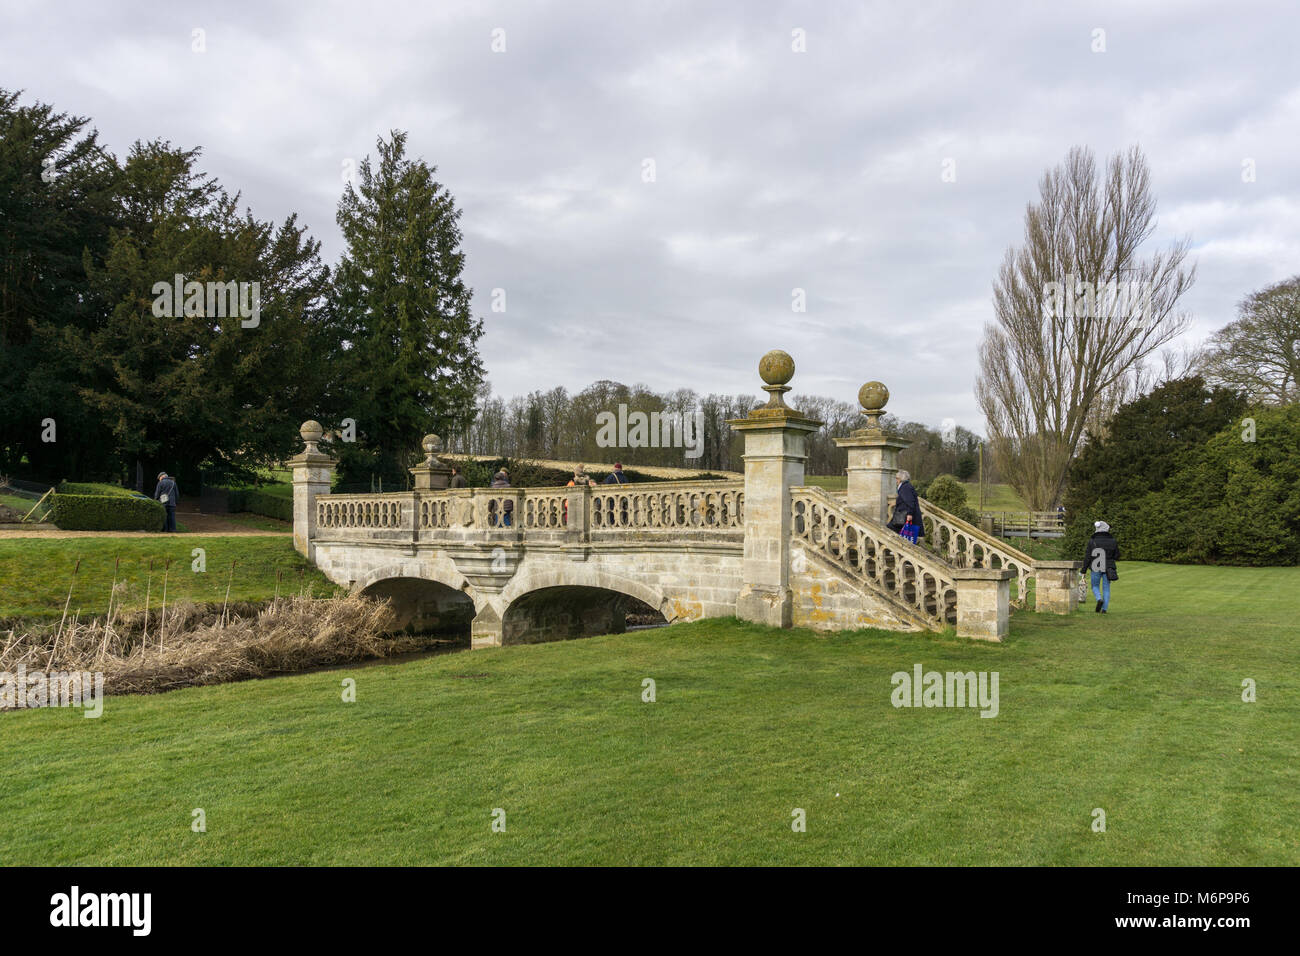 Easton Walled Gardens in winter, with visitors admiring the ornamental bridge; near Grantham, Lincolnshire, UK Stock Photo